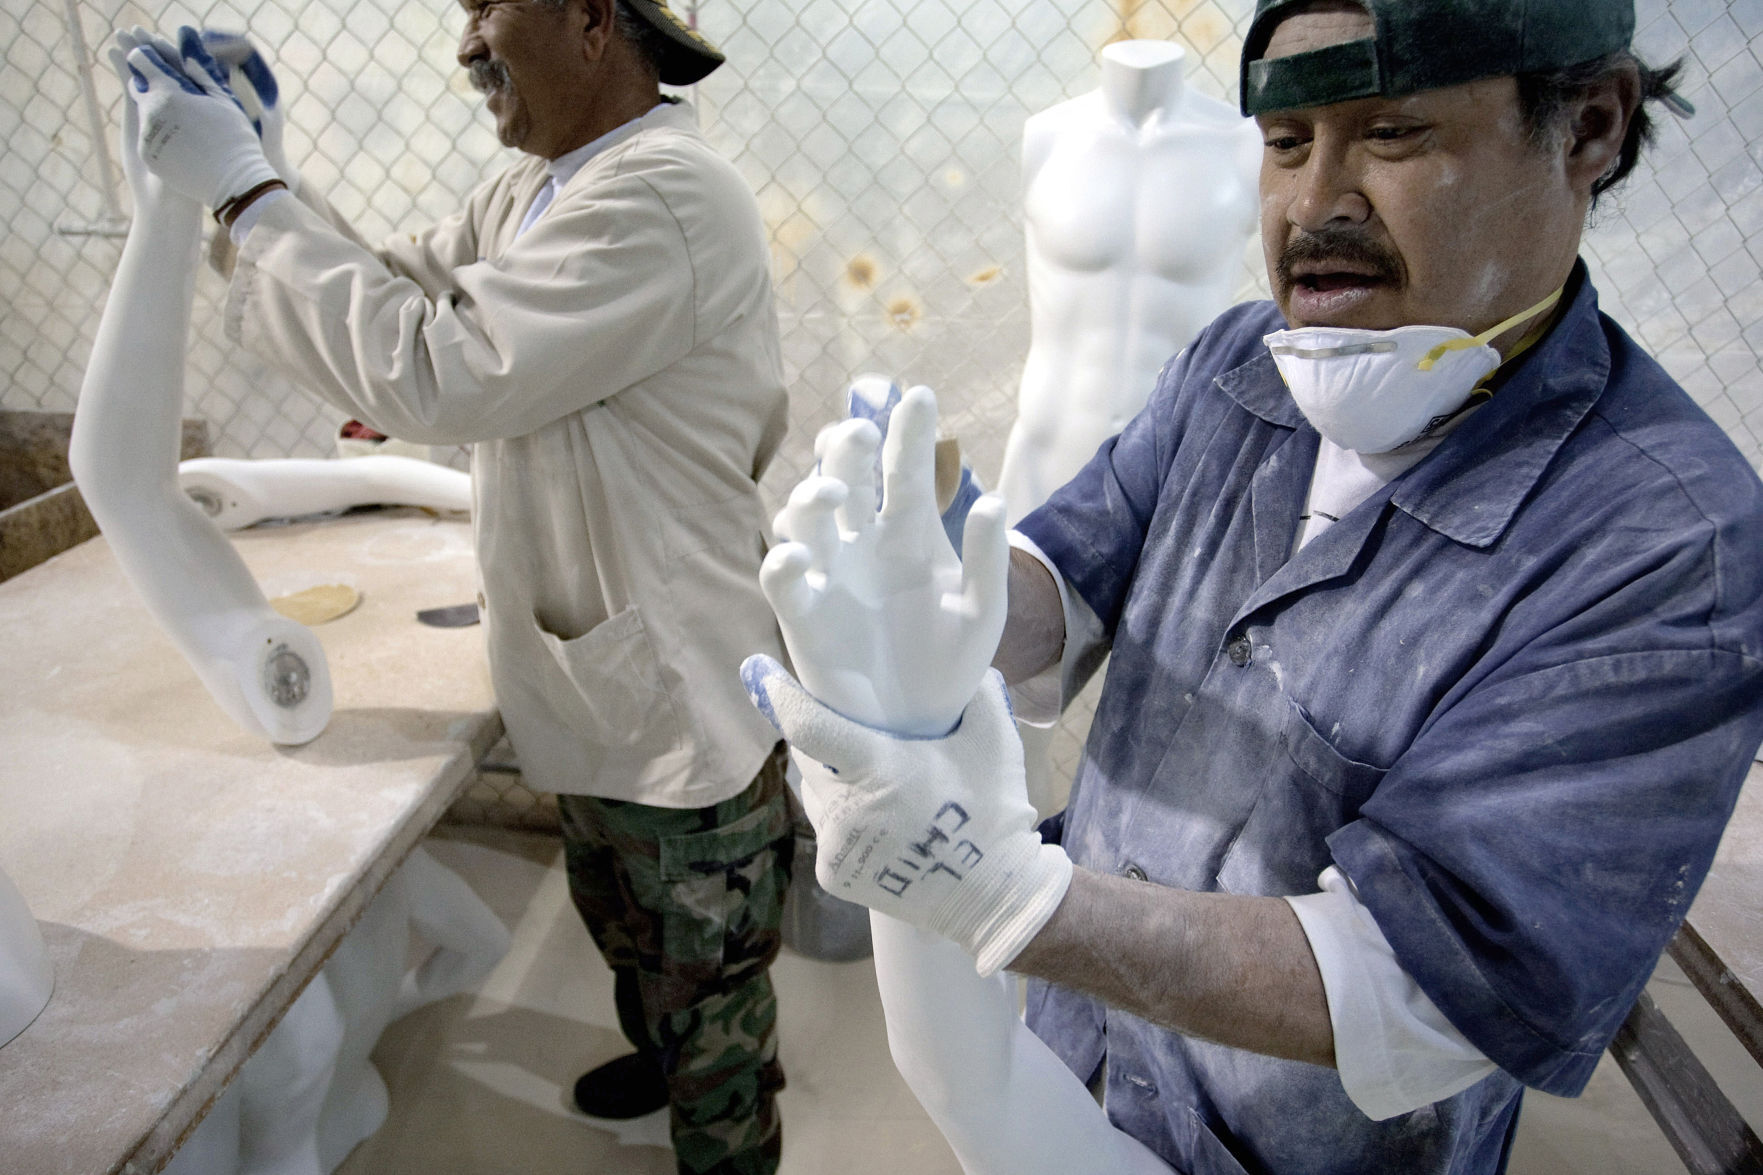 Mexican workers prepare mannequins in a factory in Ciudad Juarez, Chihuahua state.    PHOTO CREDIT: Tribune News Services